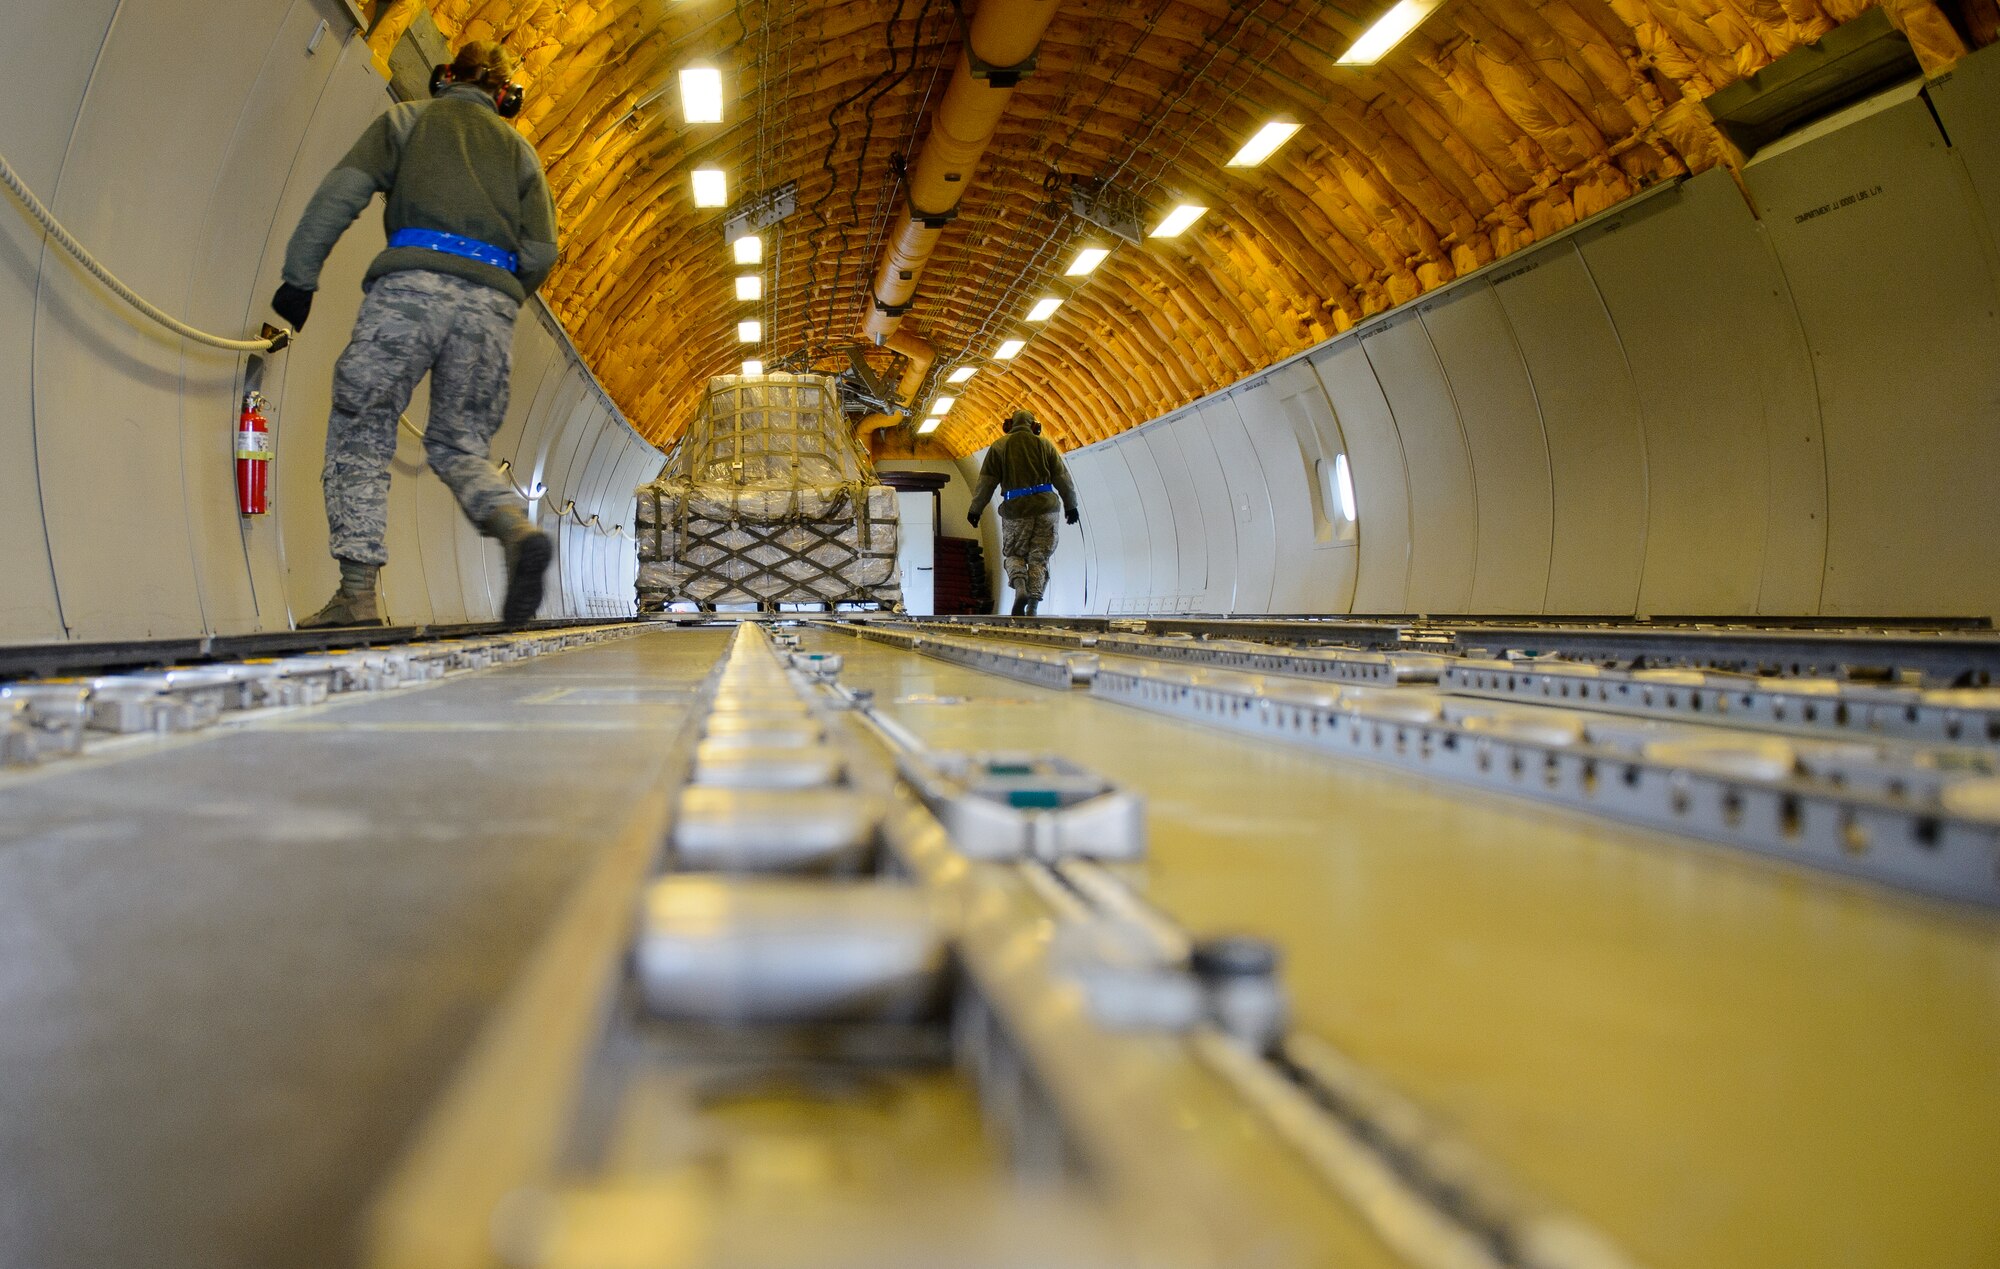 Airmen from the 721st Aerial Port Squadron, part of the 521st Air Mobility Operations Wing, move the last pallet of 40 brought by a KC-10 Extender at Ramstein Air Base, Germany, March 25, 2016. Airmen from the 721st APS helped process and move food to children in need living in Afghanistan. (U.S. Air Force photo/Staff Sgt. Armando A. Schwier-Morales)